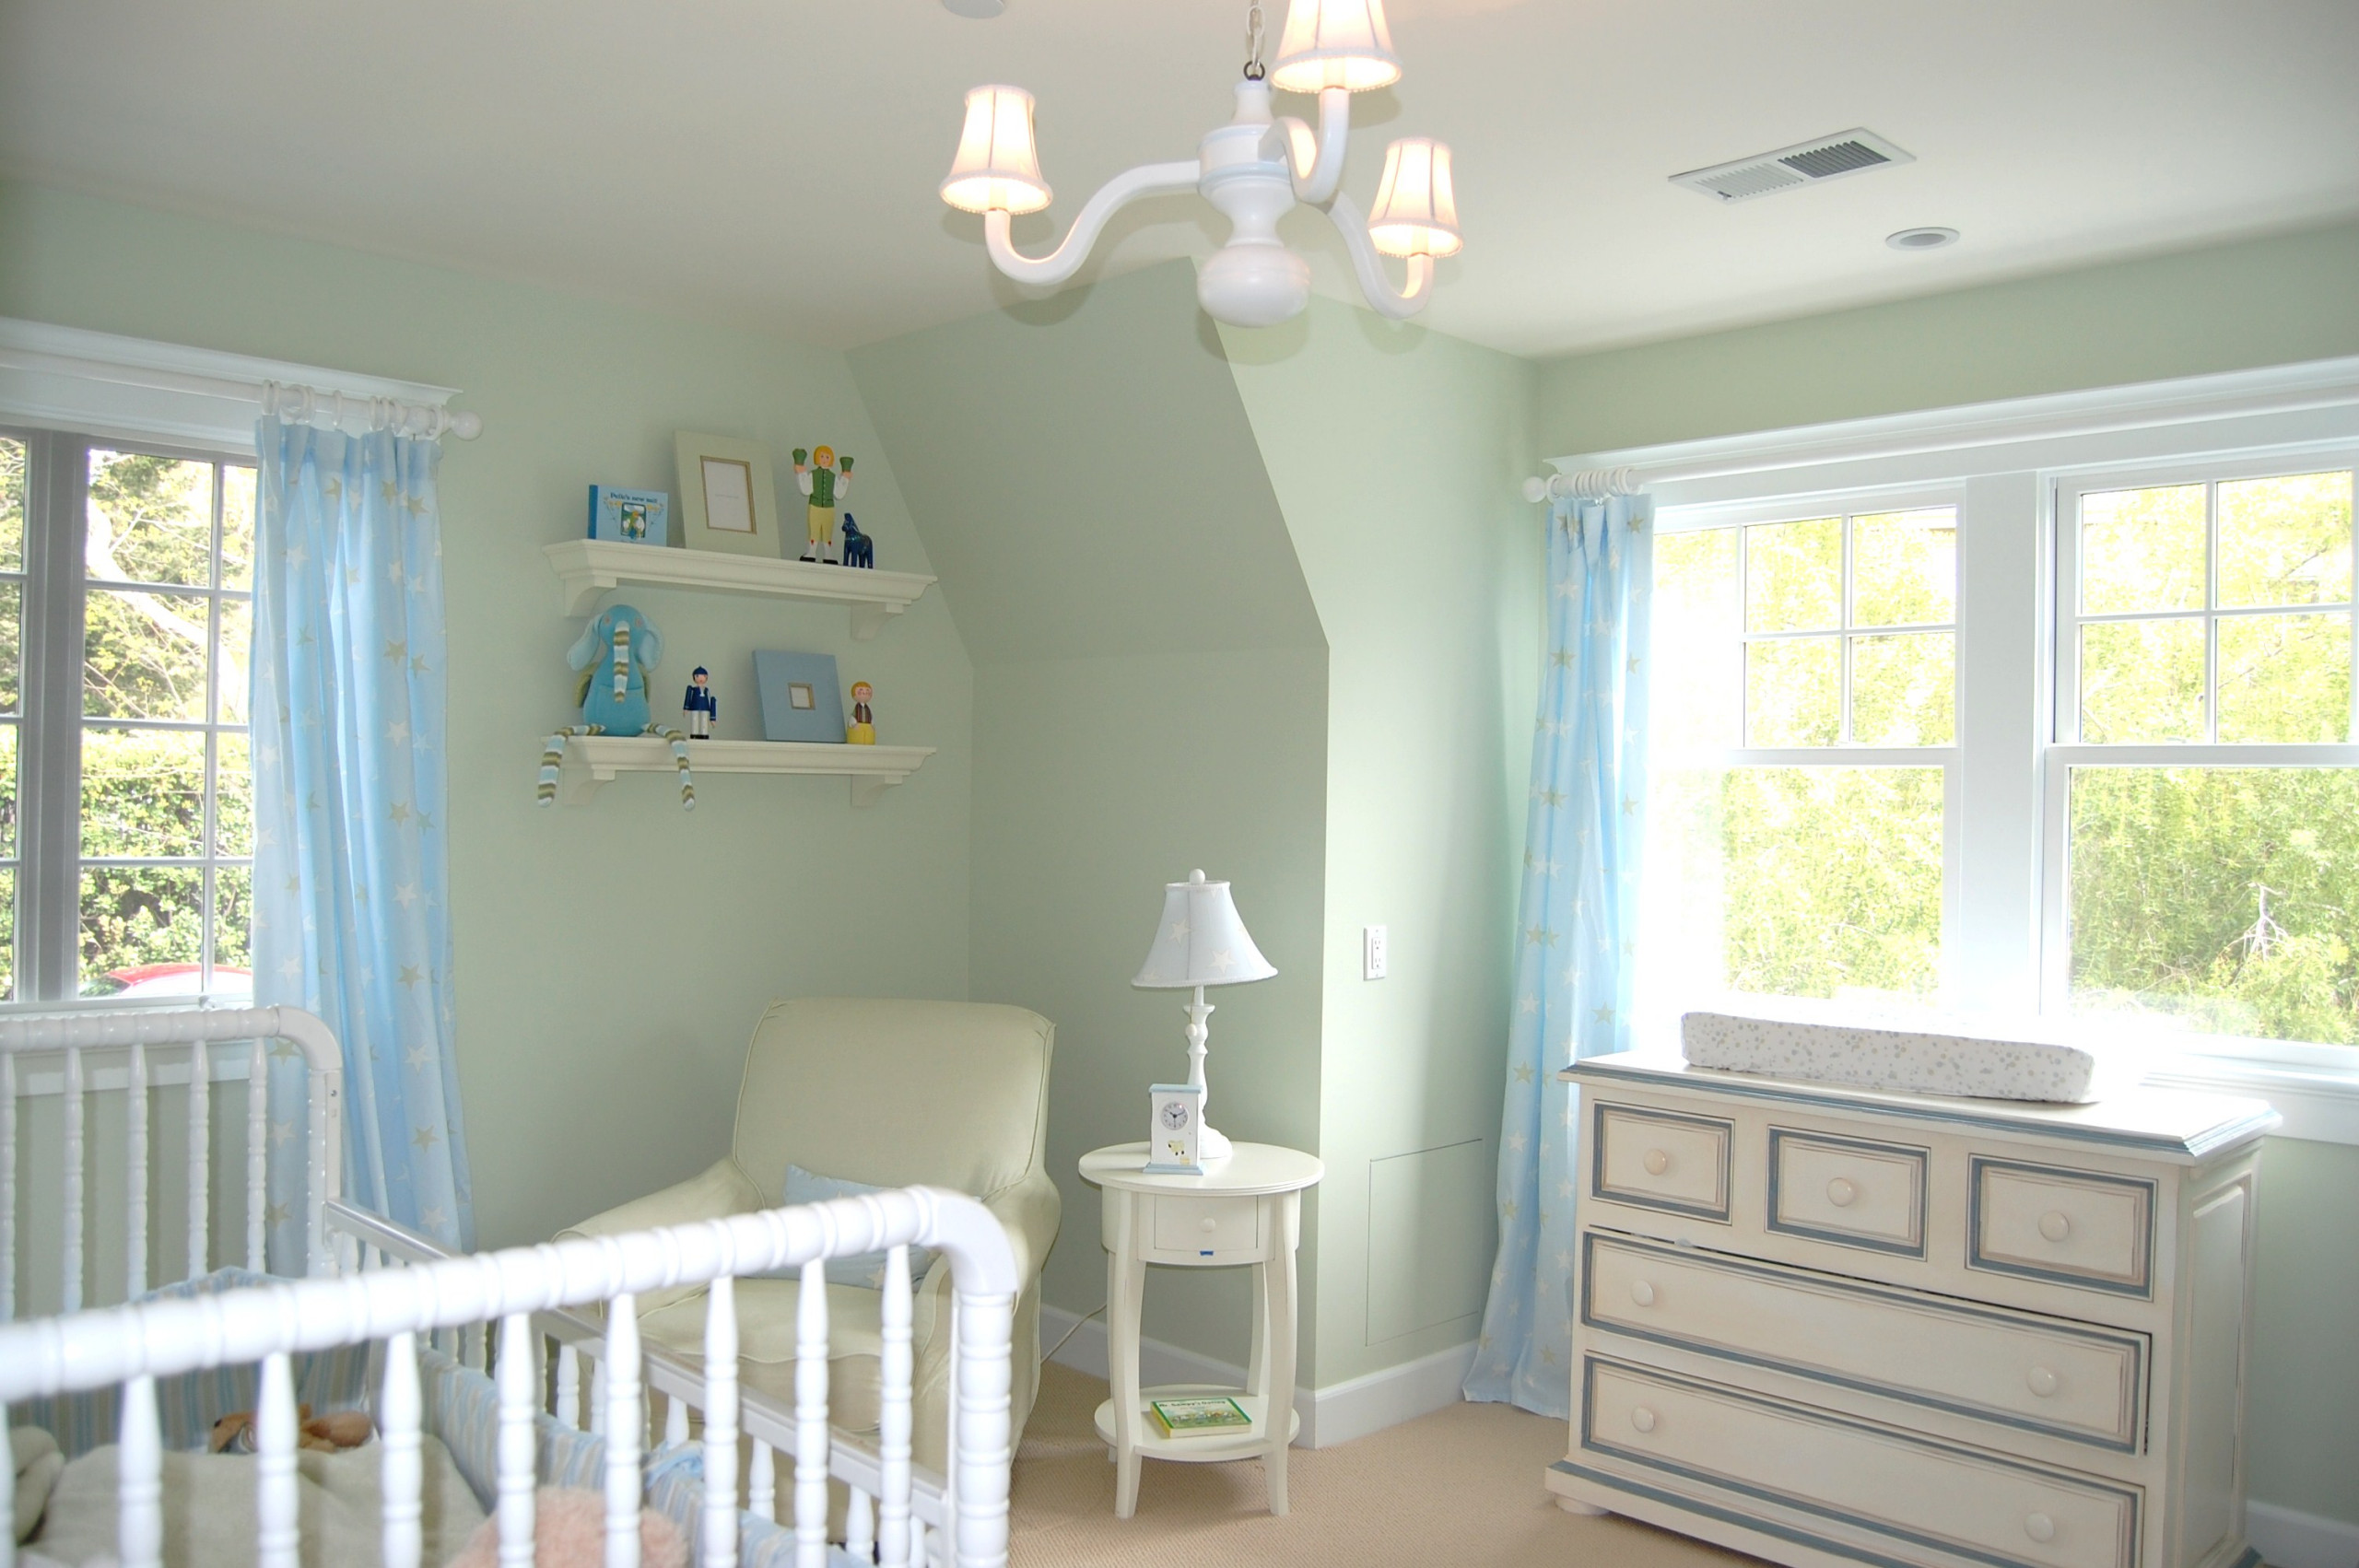 75 Beautiful Nursery Pictures Ideas Color Green August 2021 Houzz